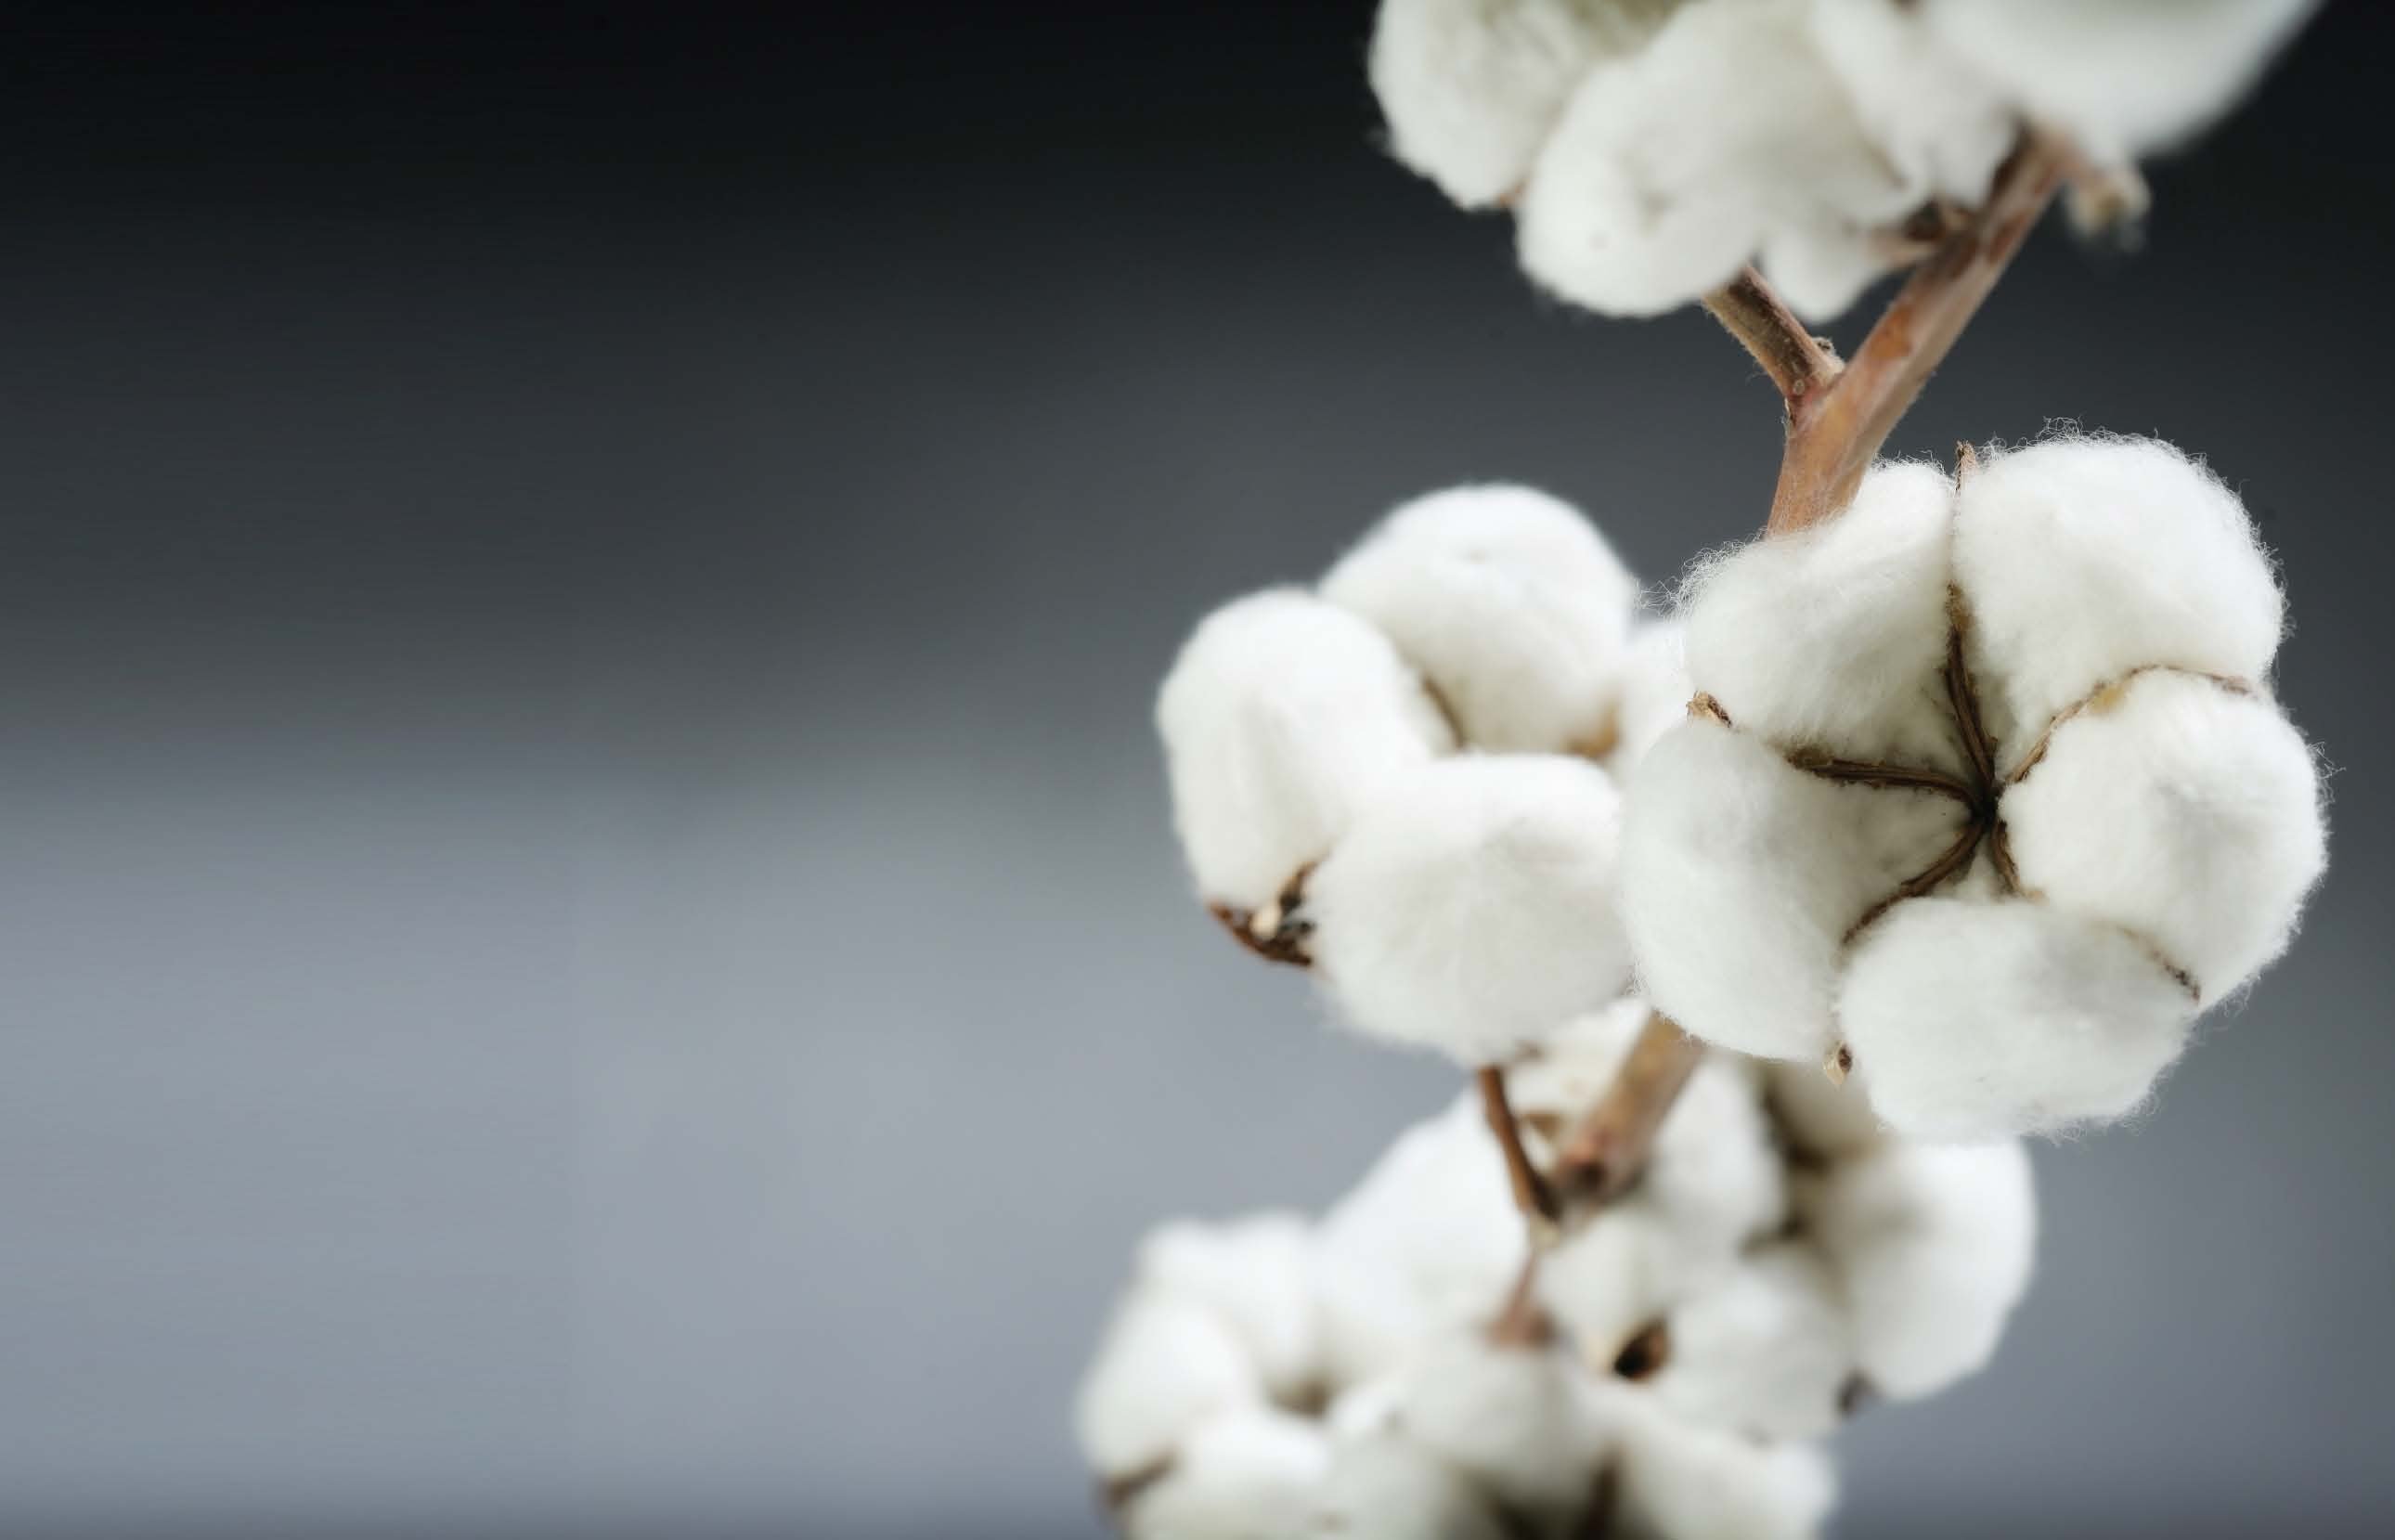 growers urged to cultivate bt cotton